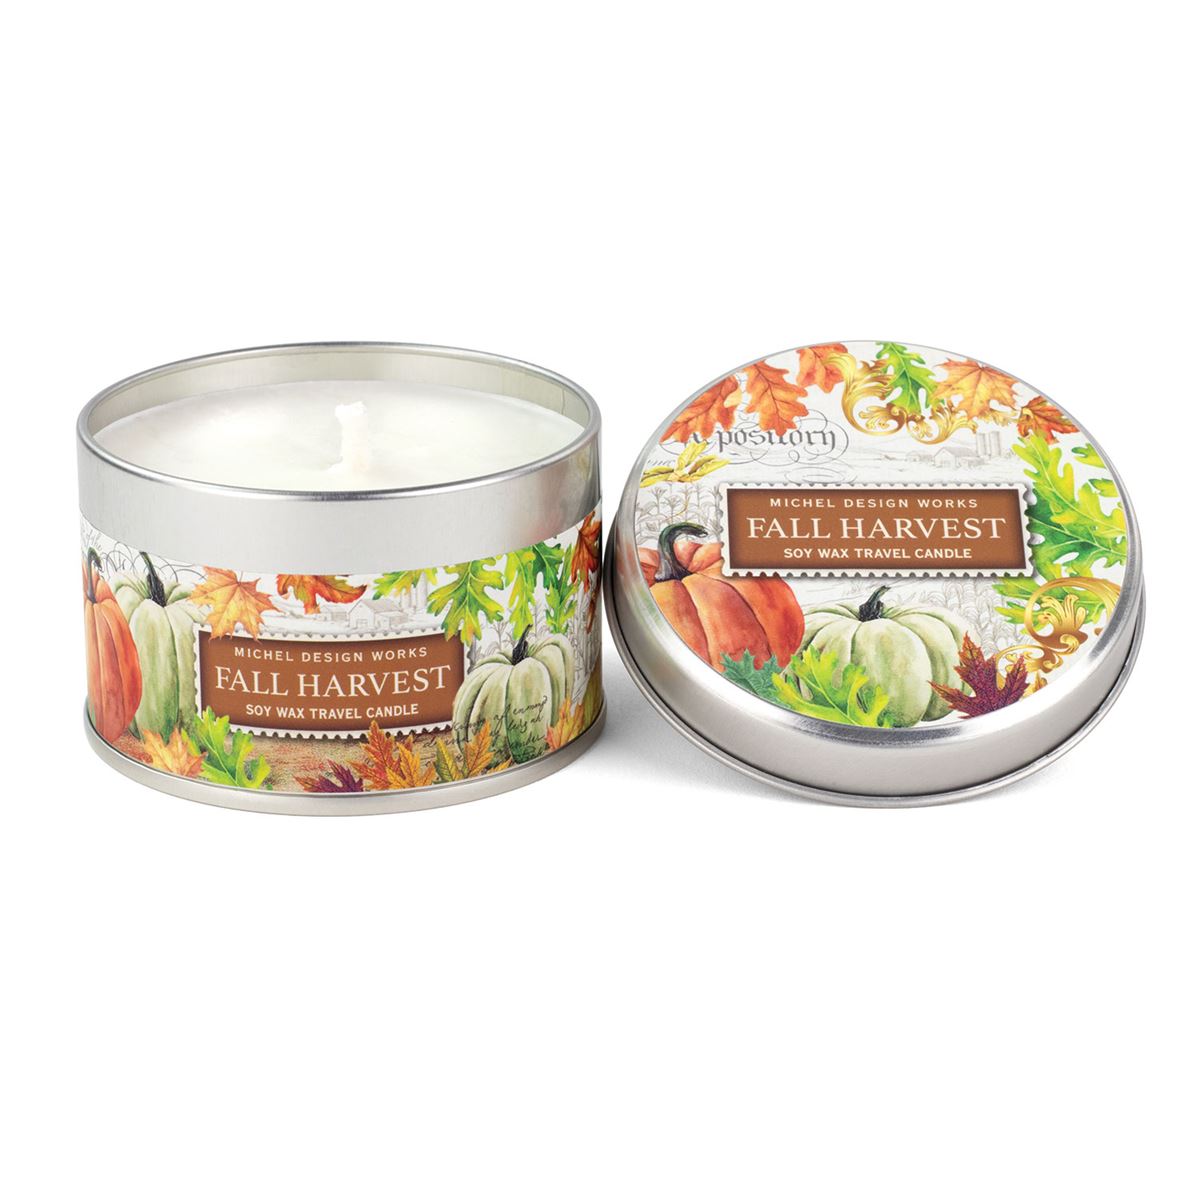 Michel Design Works Travel Tin Candle - 4 oz. - Fall Harvest